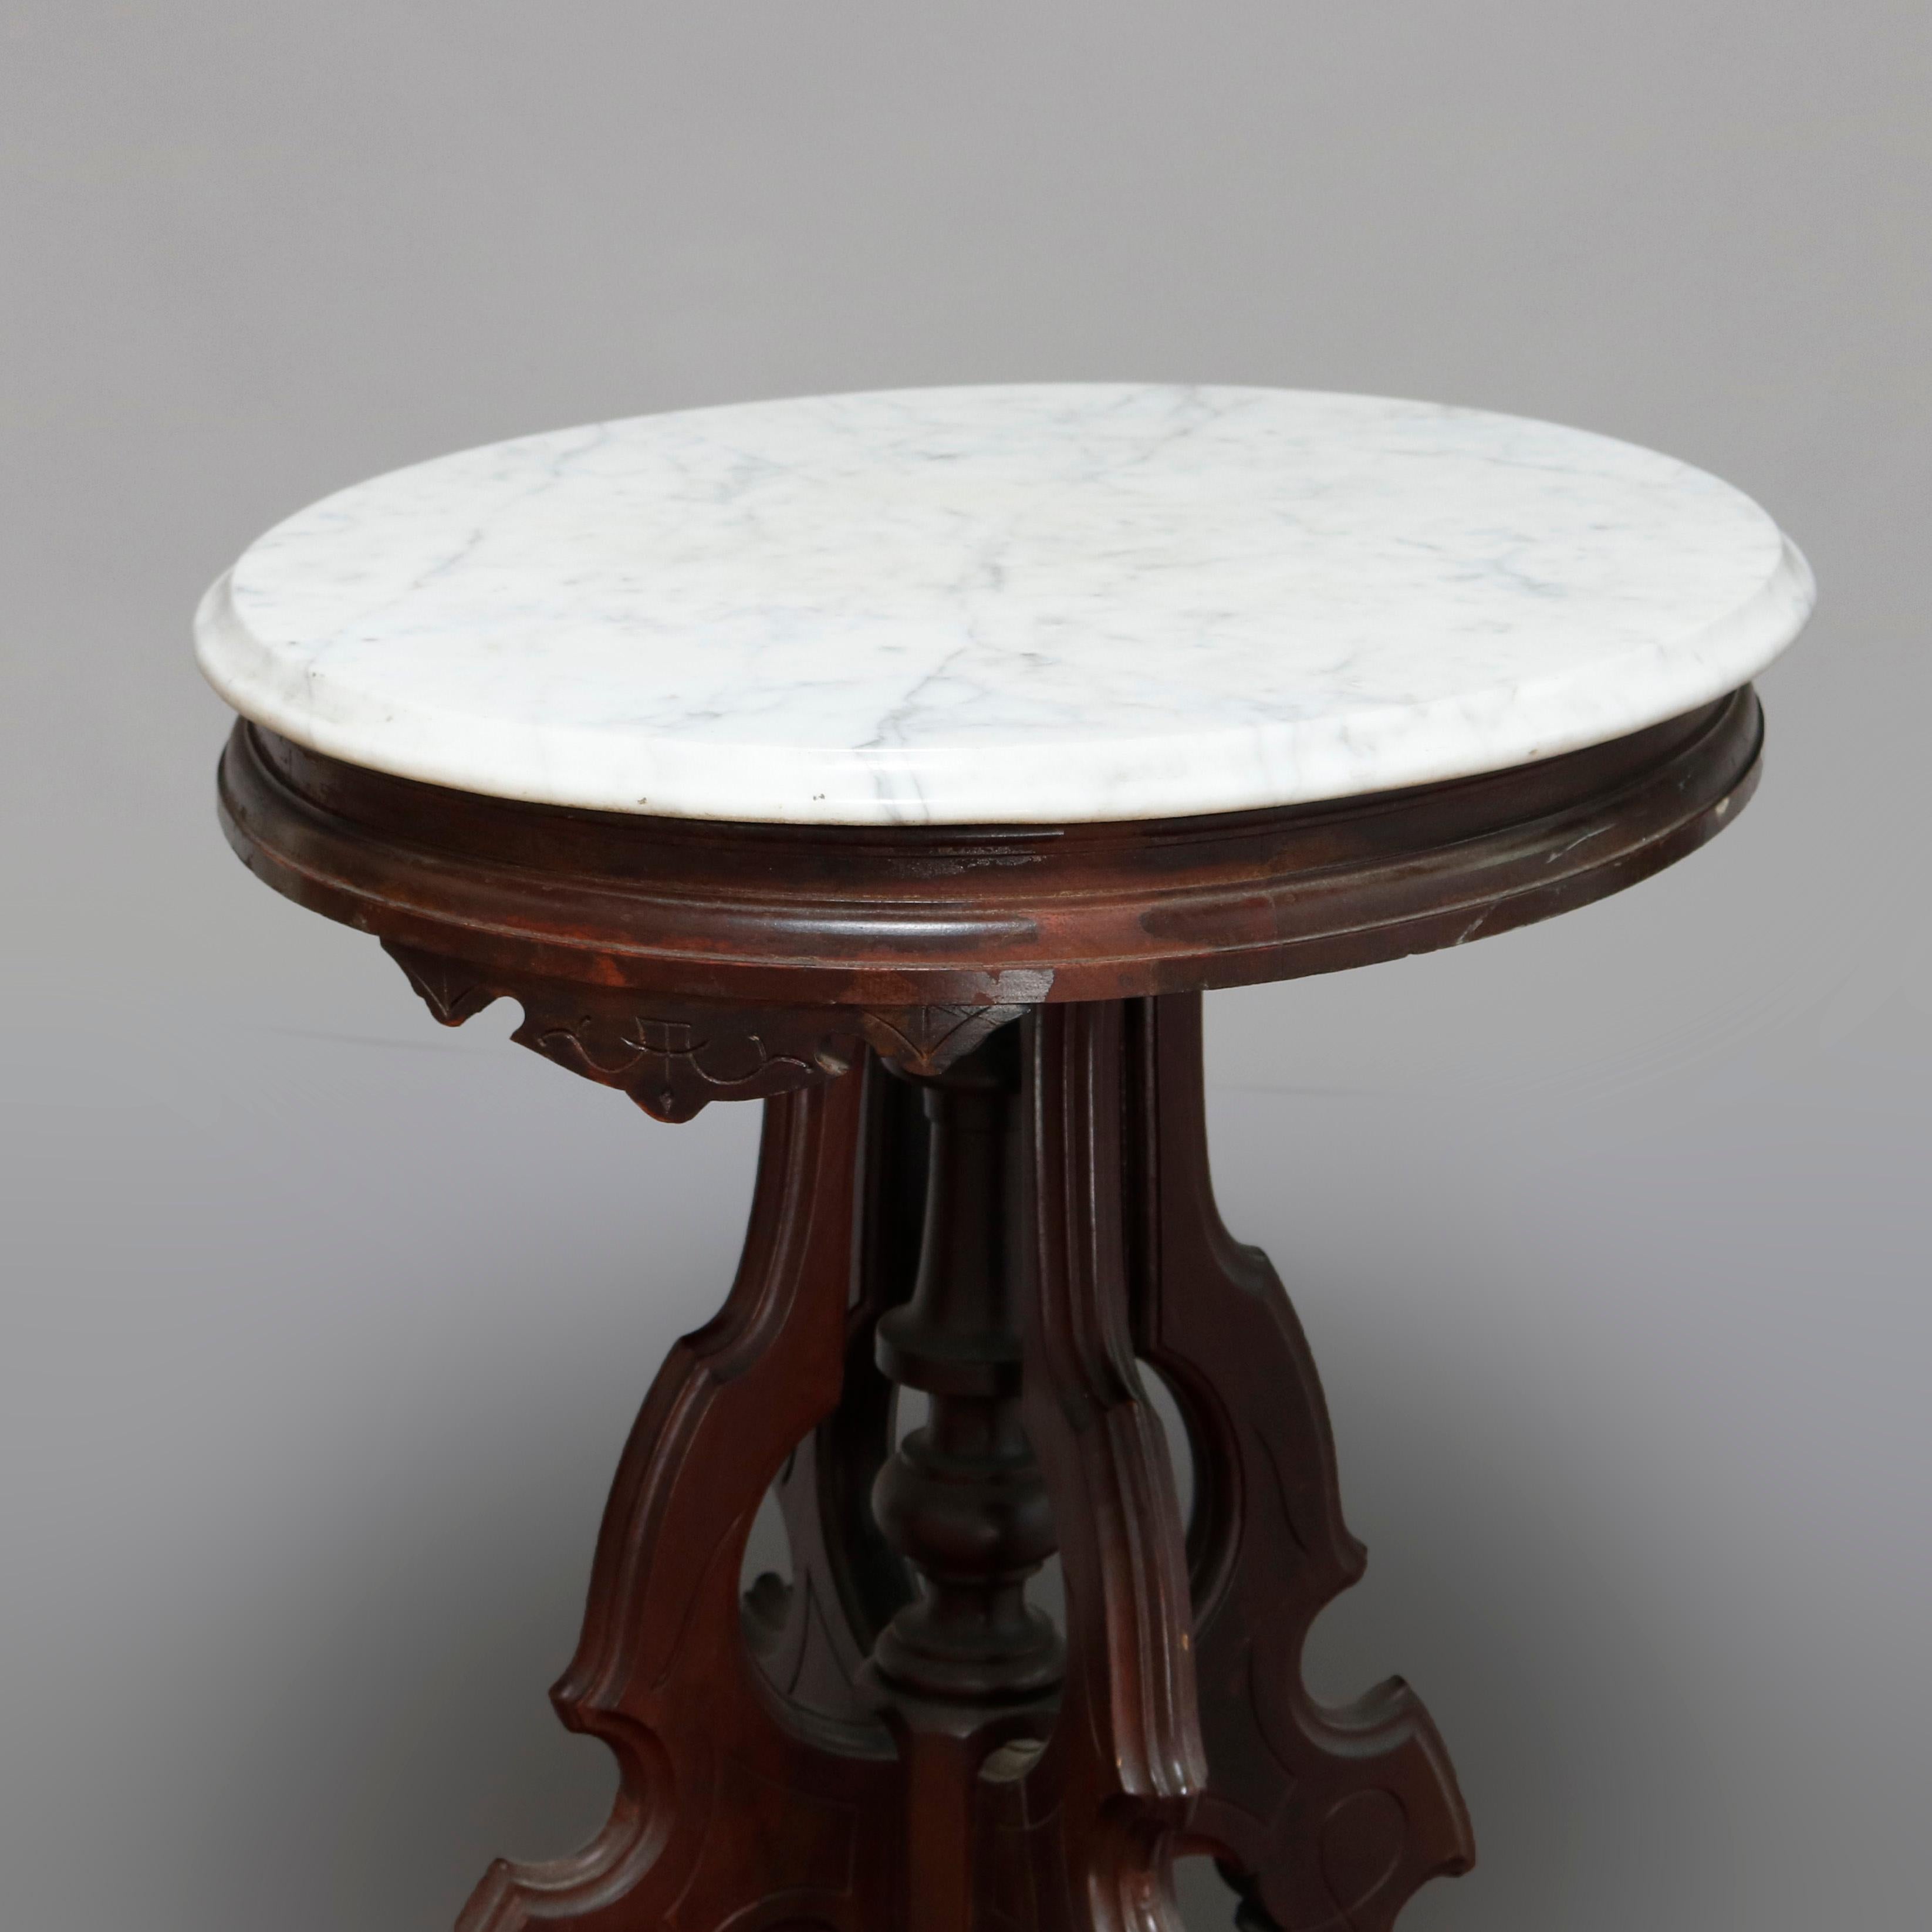 An antique Victorian Eastlake side table offers a beveled oval marble top surmounting carved walnut frame having shaped skirt raised on scroll legs with central turned column, circa 1880

***DELIVERY NOTICE – Due to COVID-19 we have employed